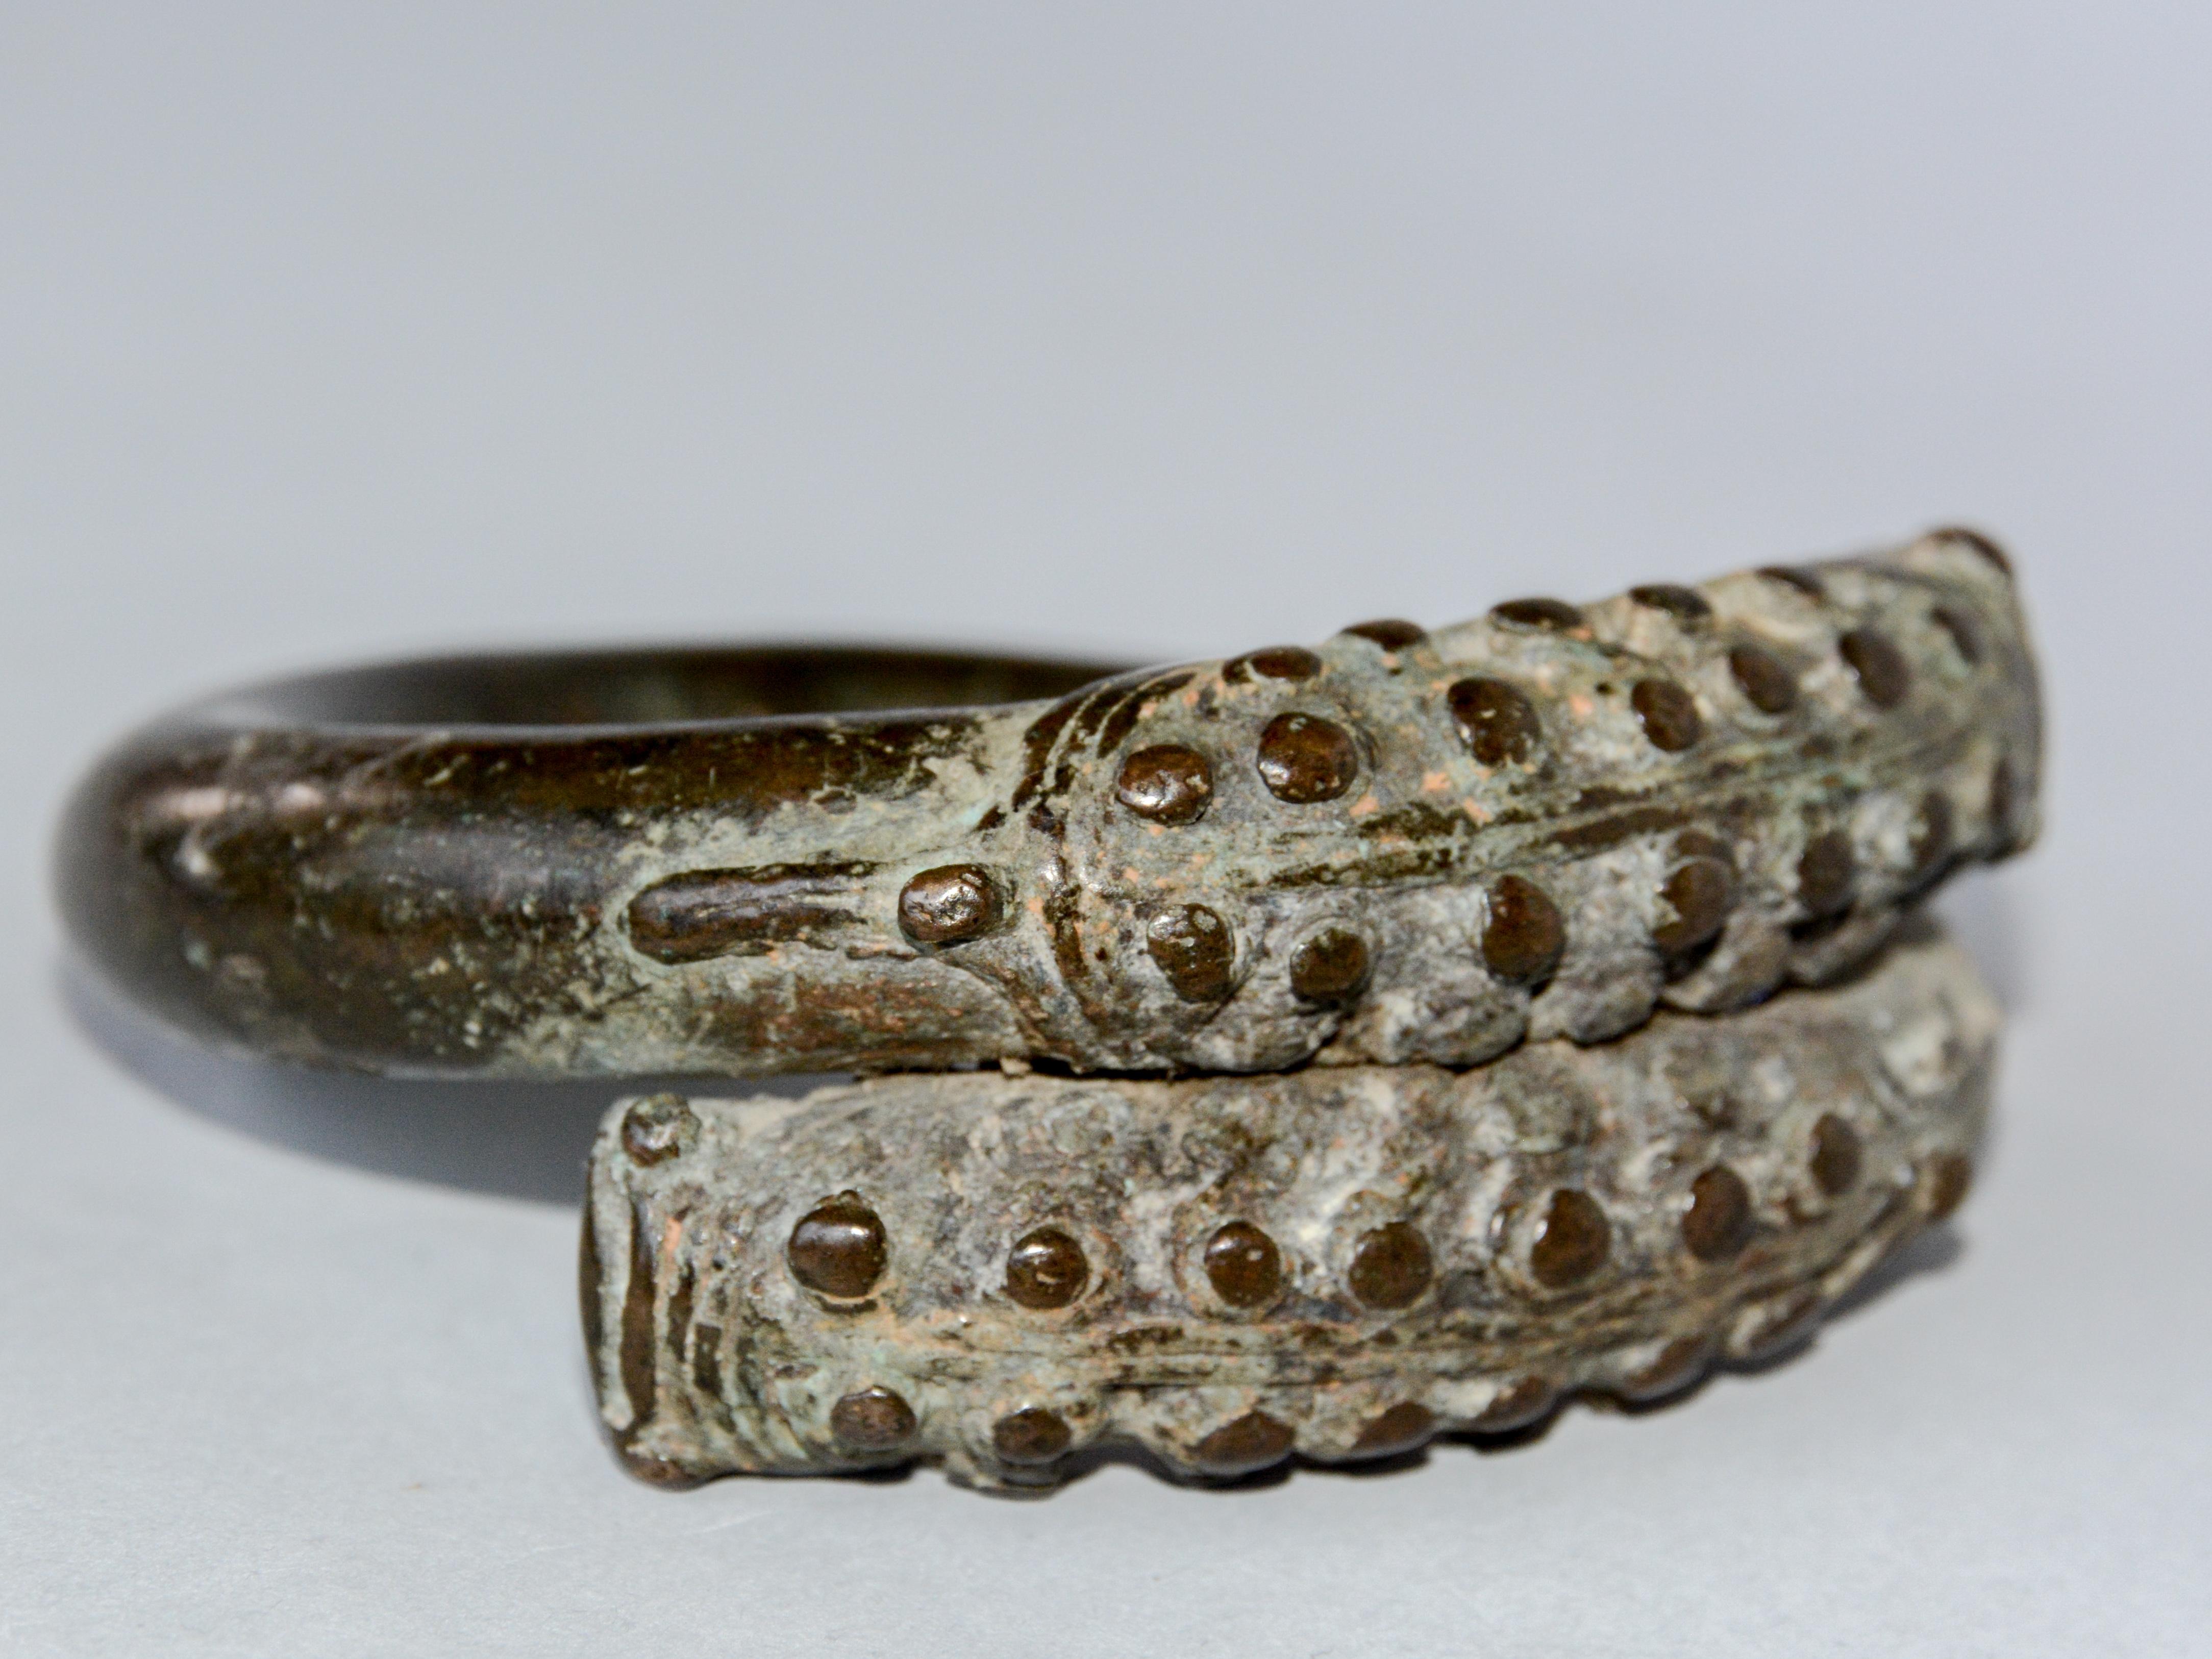 Laotian Antique Bronze Bracelet from Laos with a Naga or Serpent Motif, 18th Century